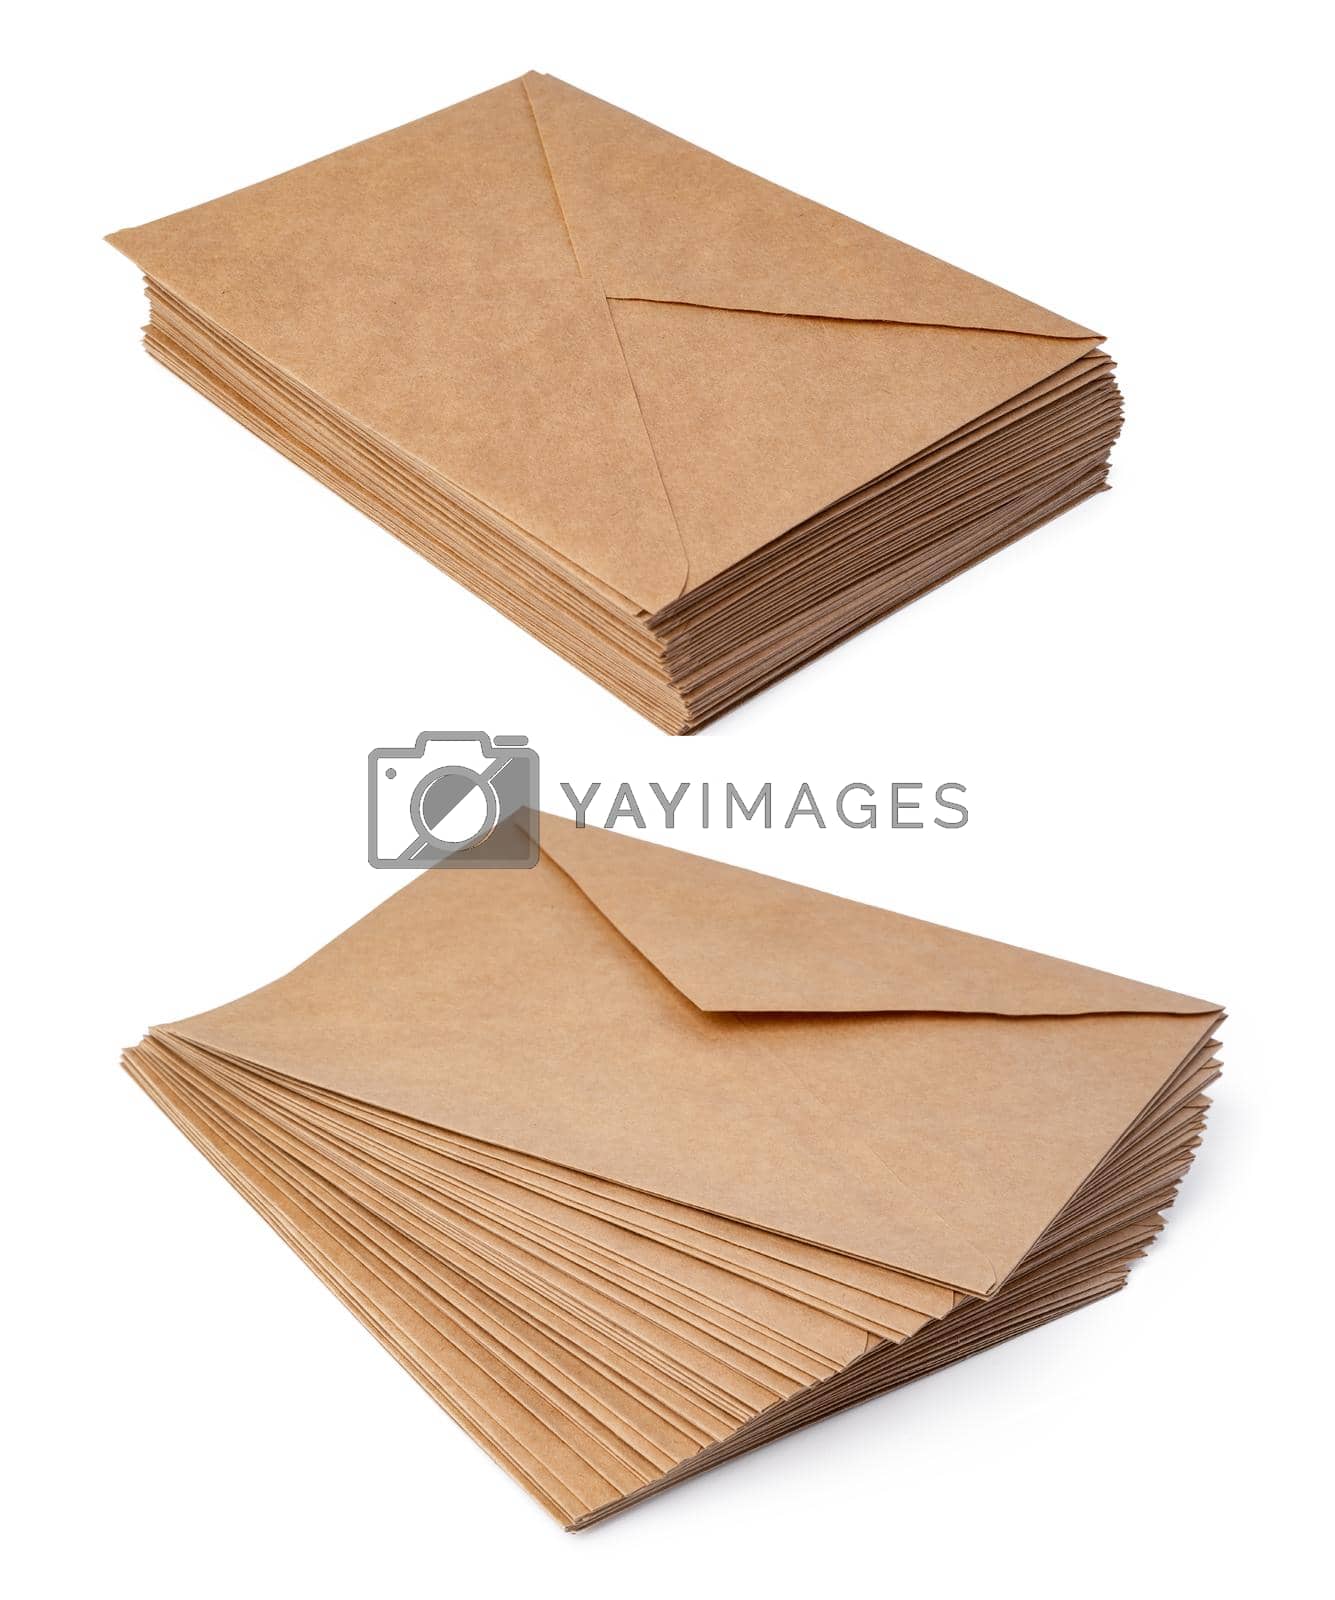 Royalty free image of Brown craft envelope isolated on white background by Fabrikasimf